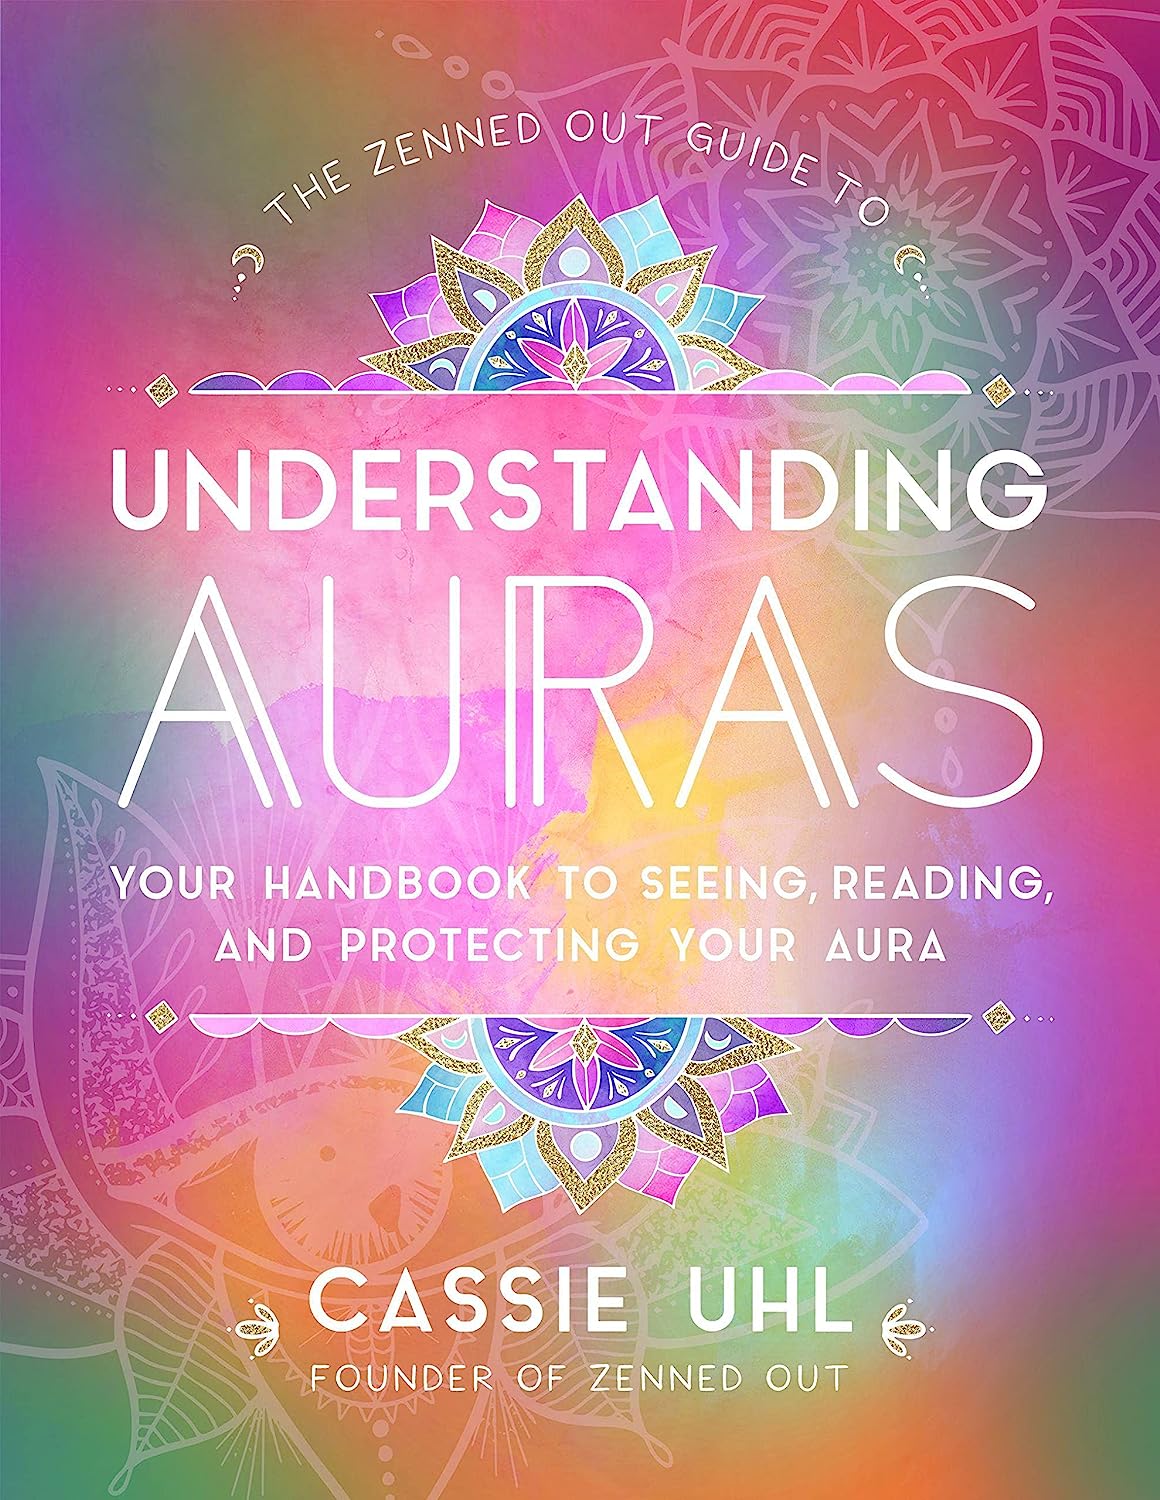 The Zenned Out Guide to Understanding Auras by Cassie Uhl